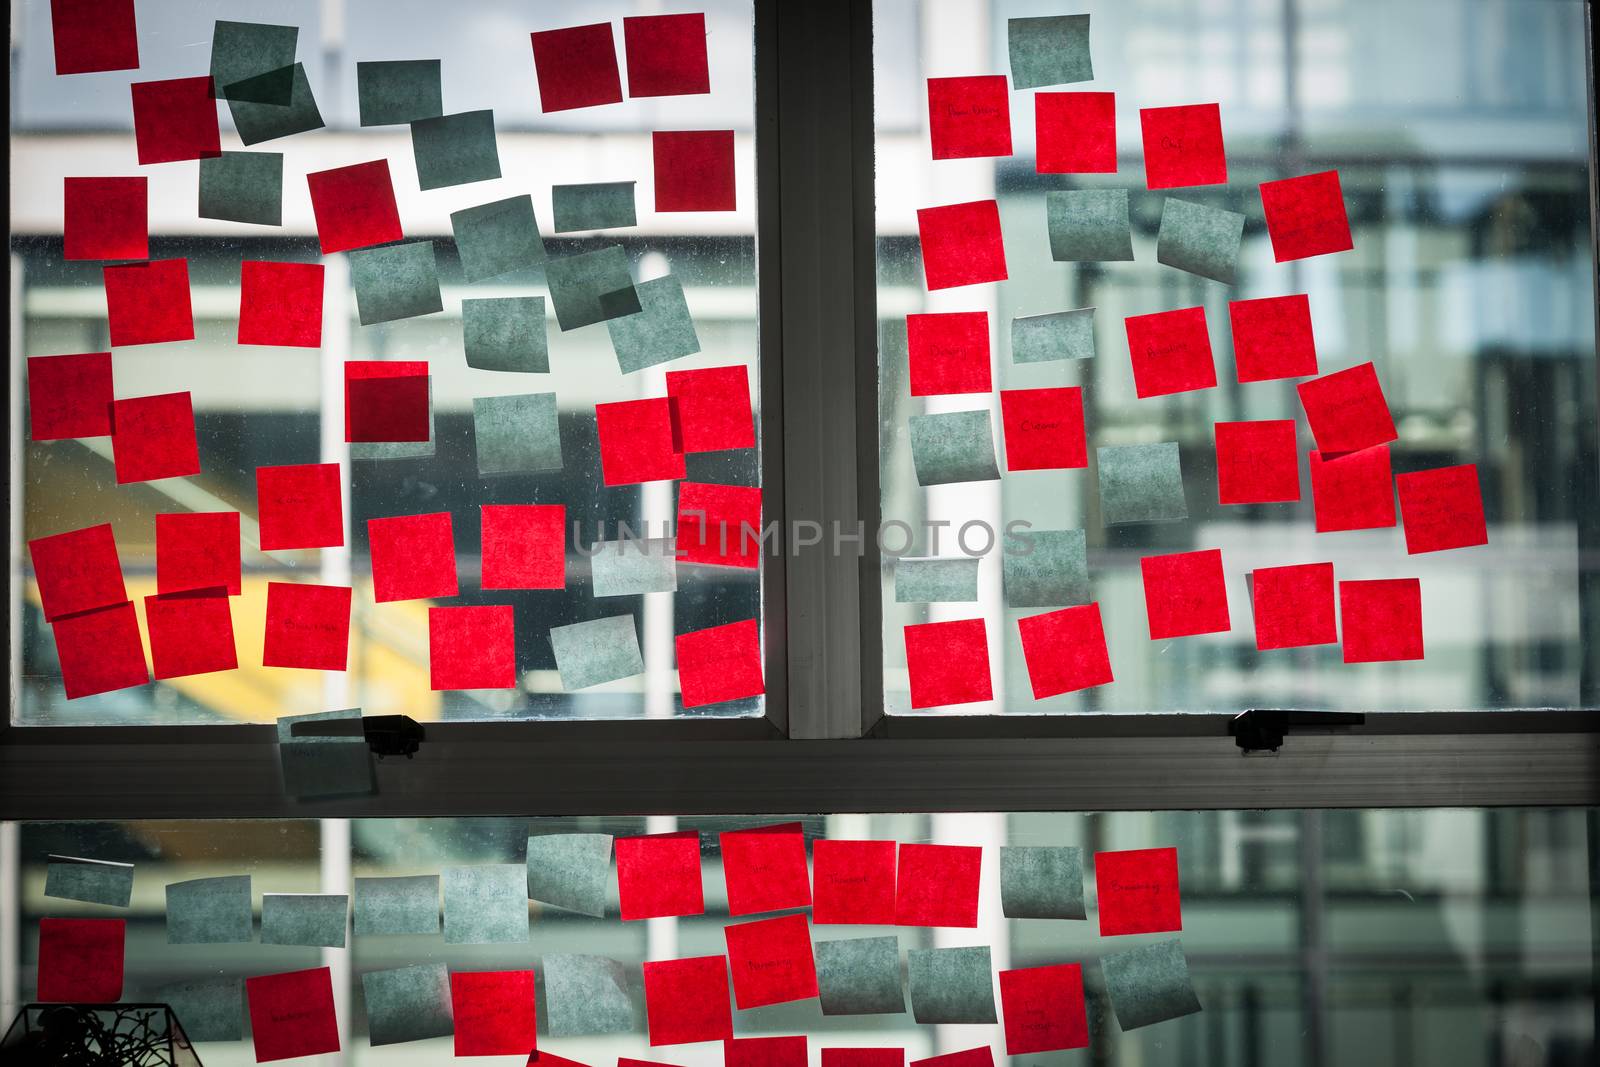 Office window used to ideas board with red and blue sticky note papers stuck to the inside looking through to next building.